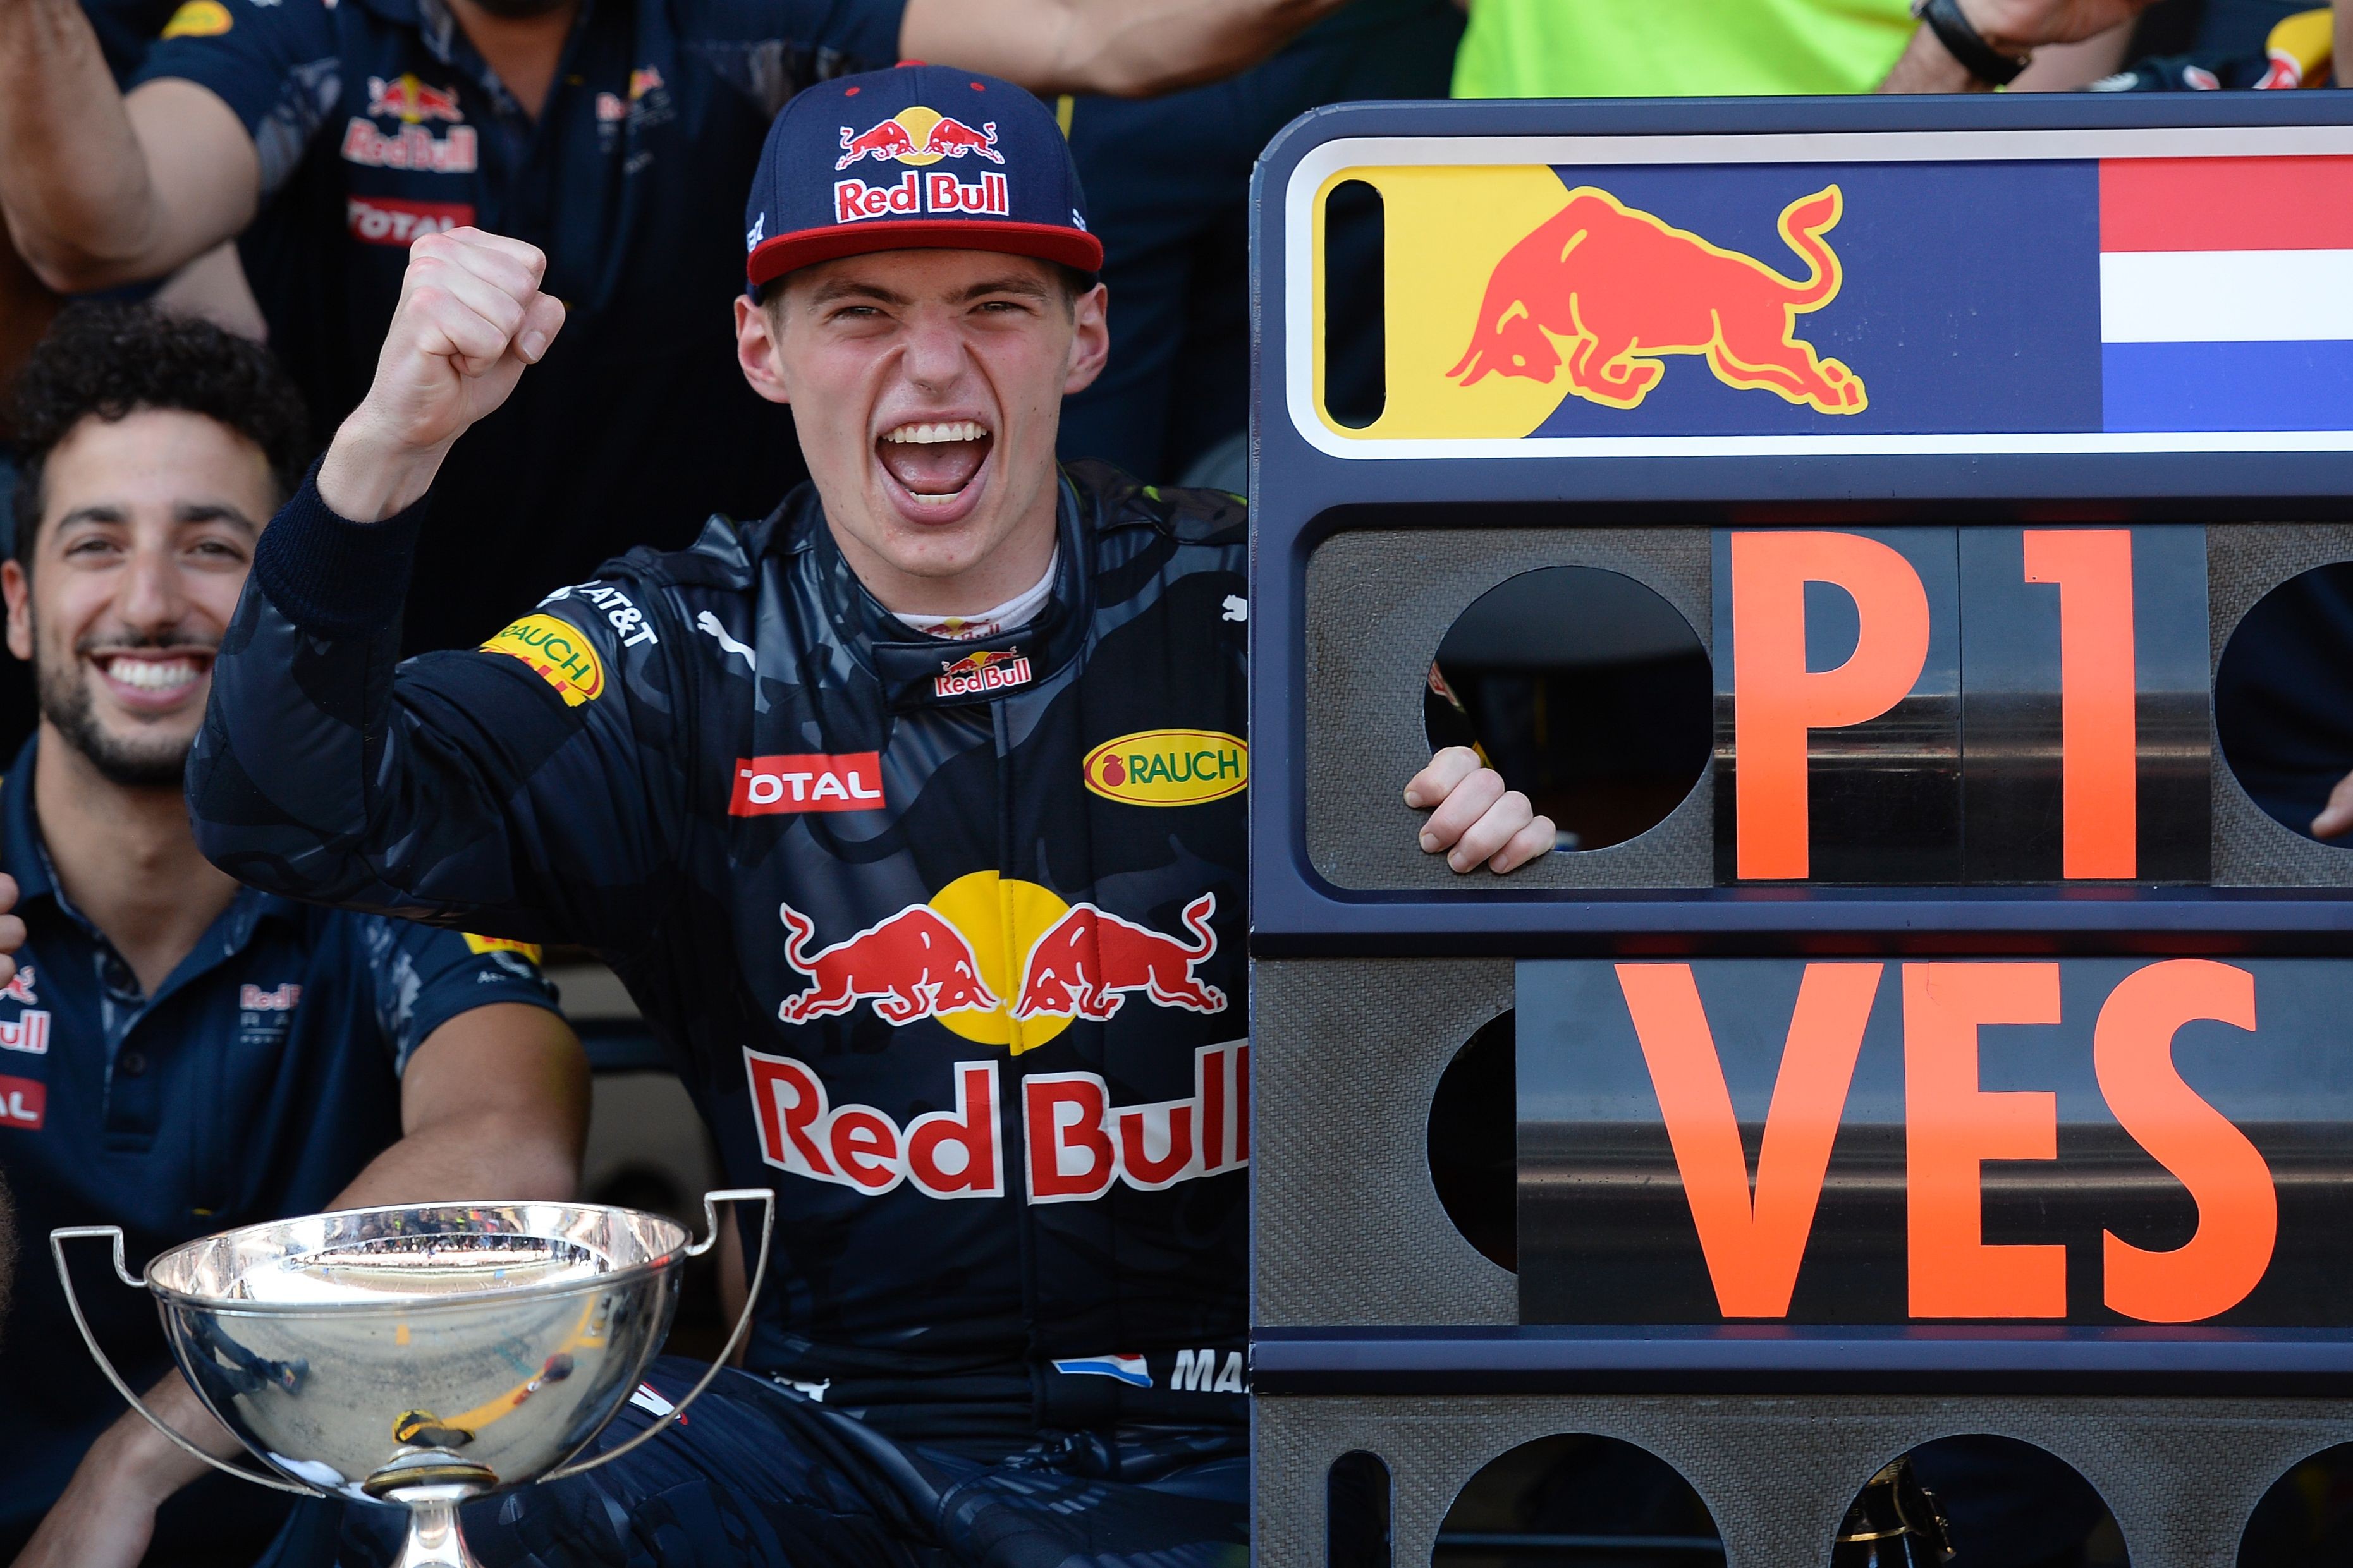 Red Bull’s Max Verstappen celebrates after his victory in his first race with the team at the Spanish Grand Prix in 2016. Photo: AFP